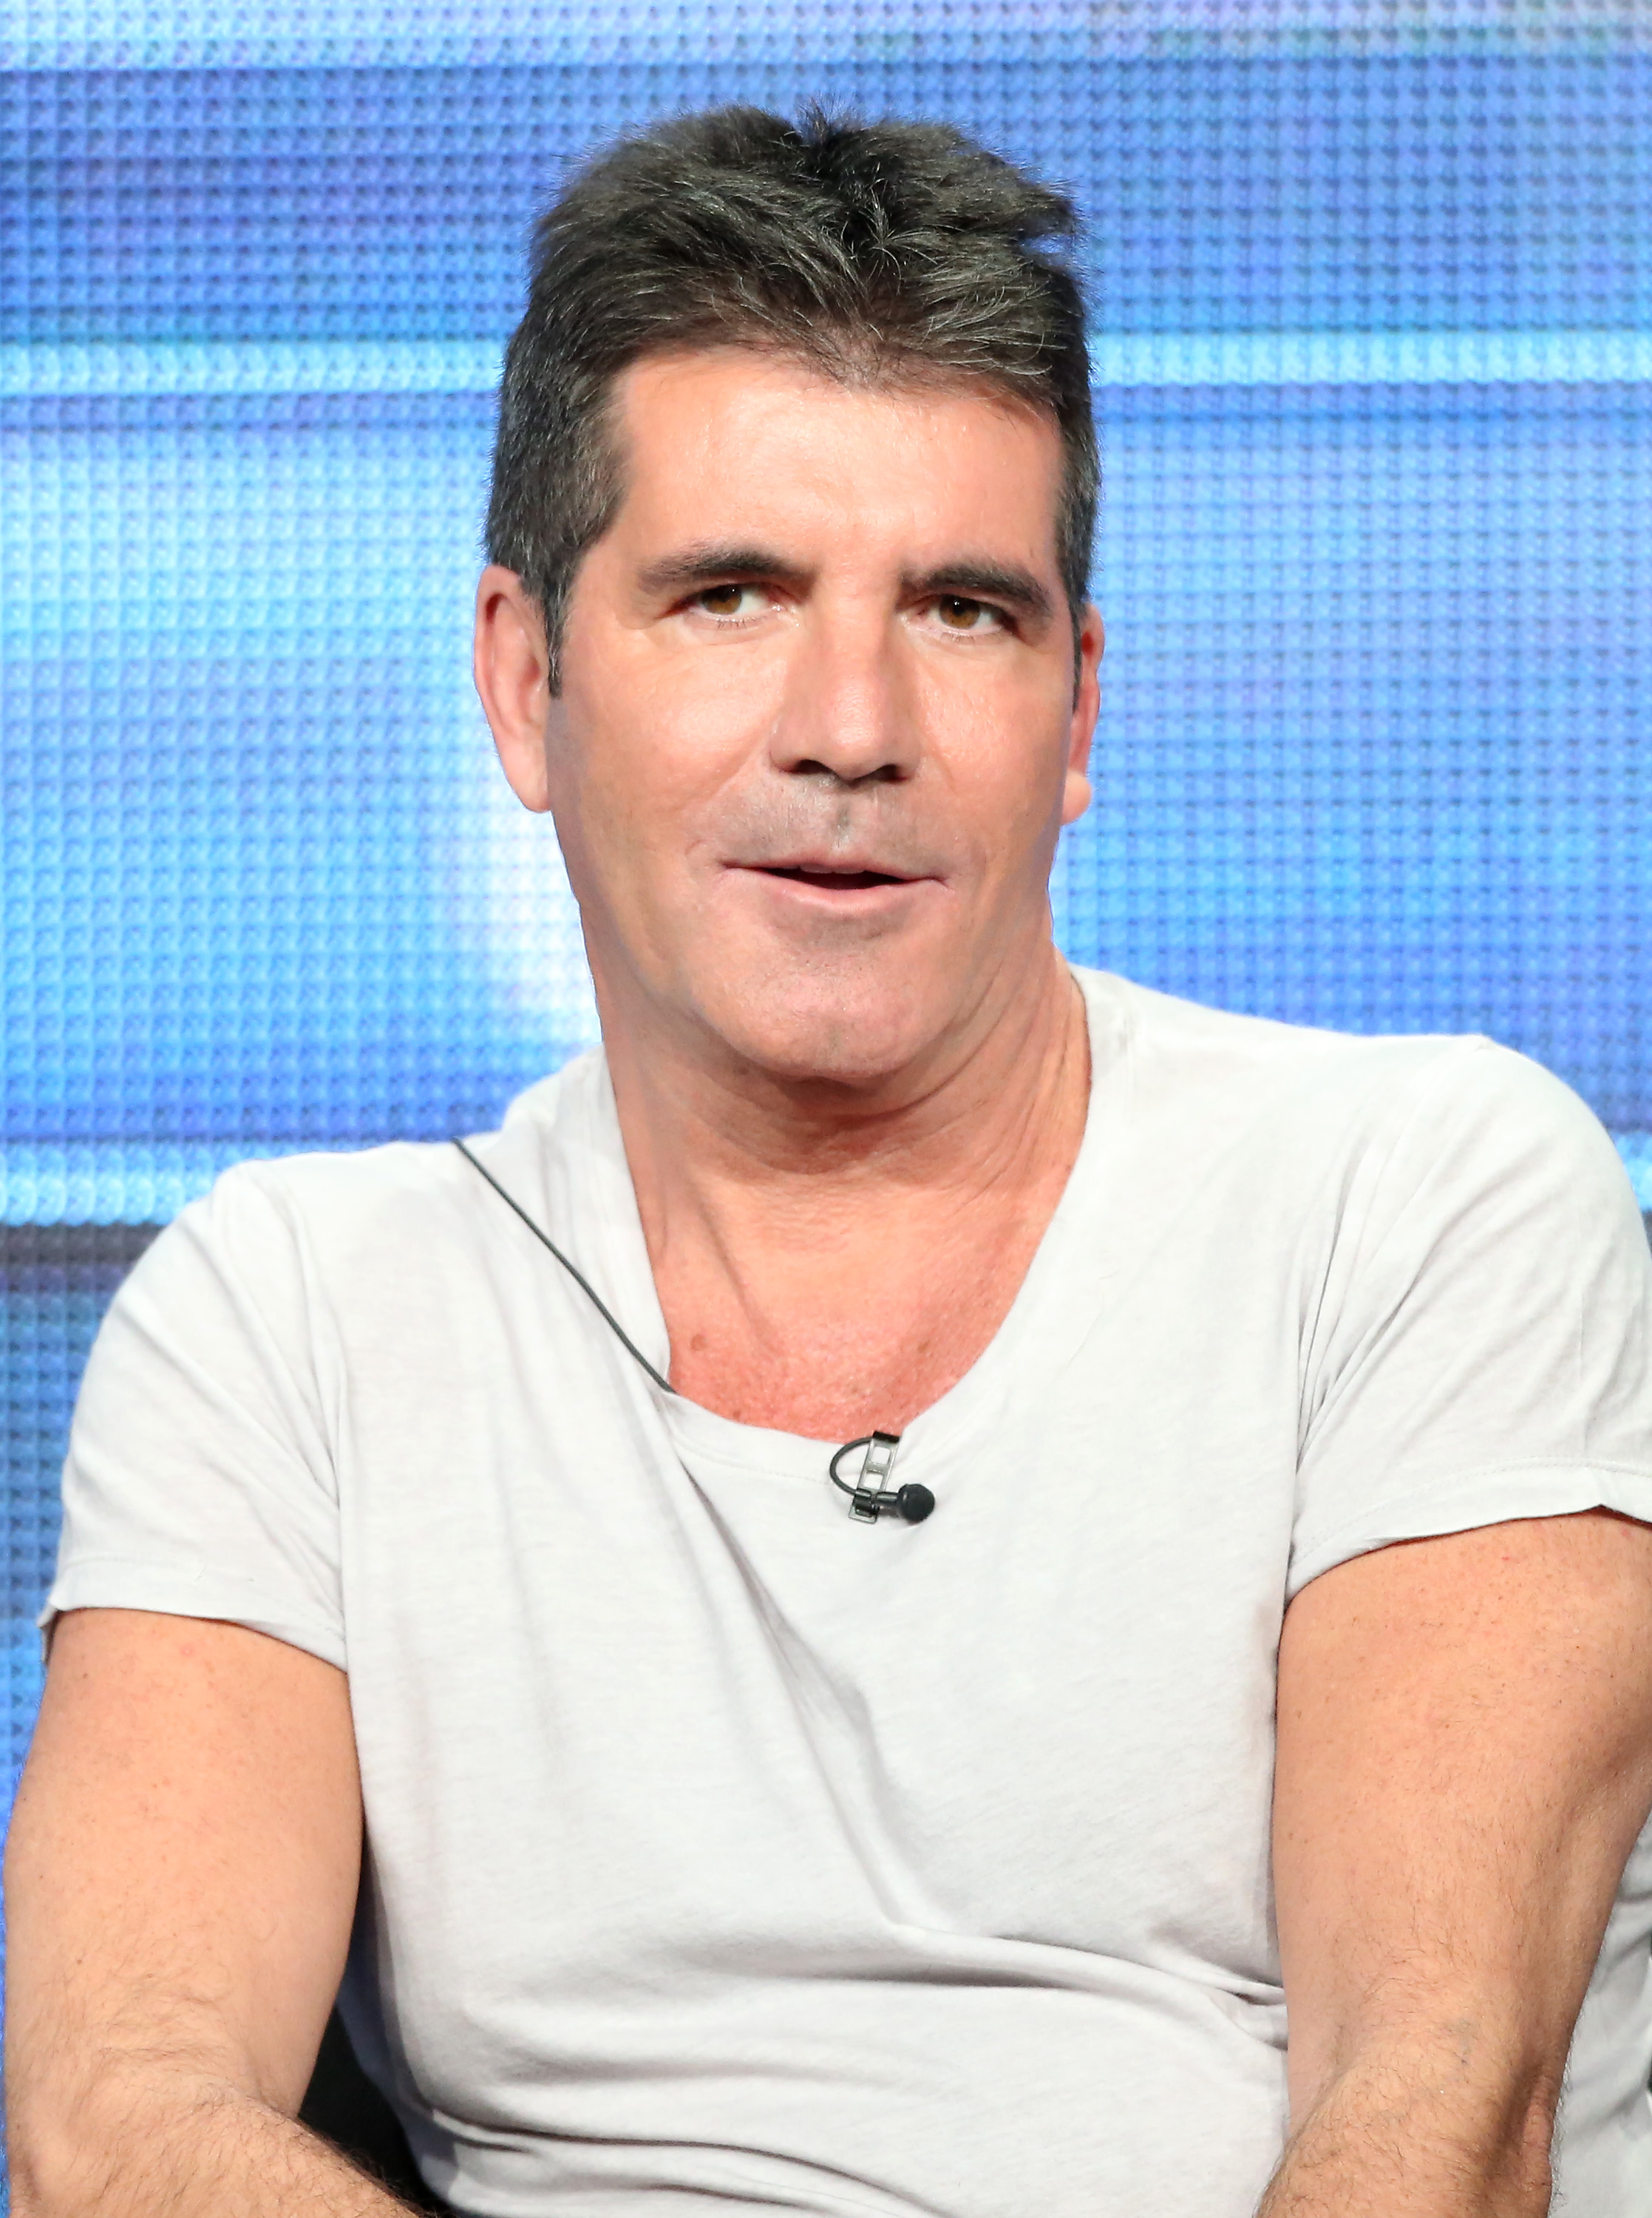 Simon Cowell at the 2013 Summer TCA Tour in Beverly Hills | Source: Getty Images